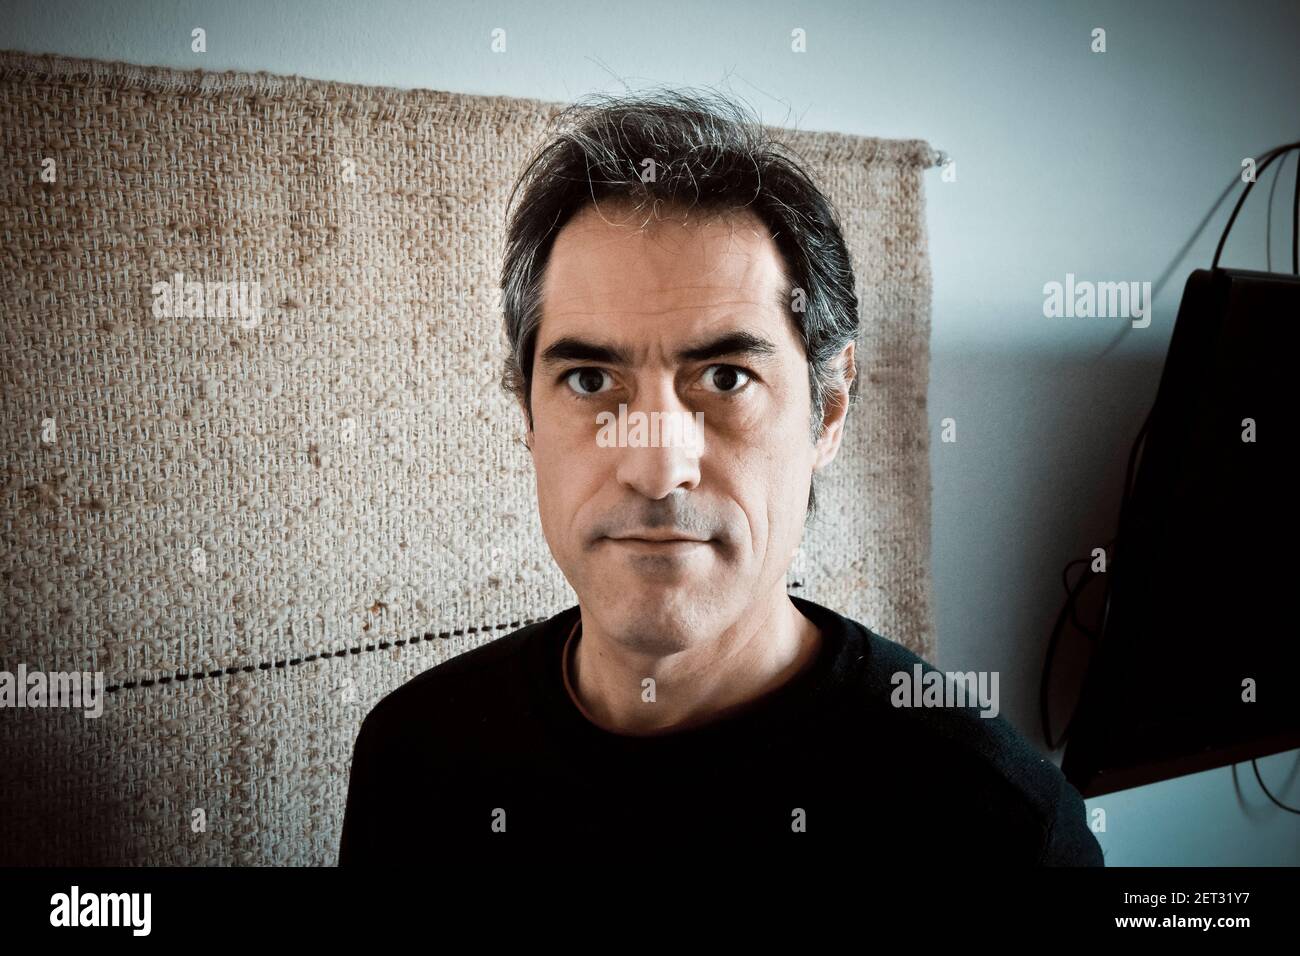 Portrait of a middle-aged man at home. Stock Photo